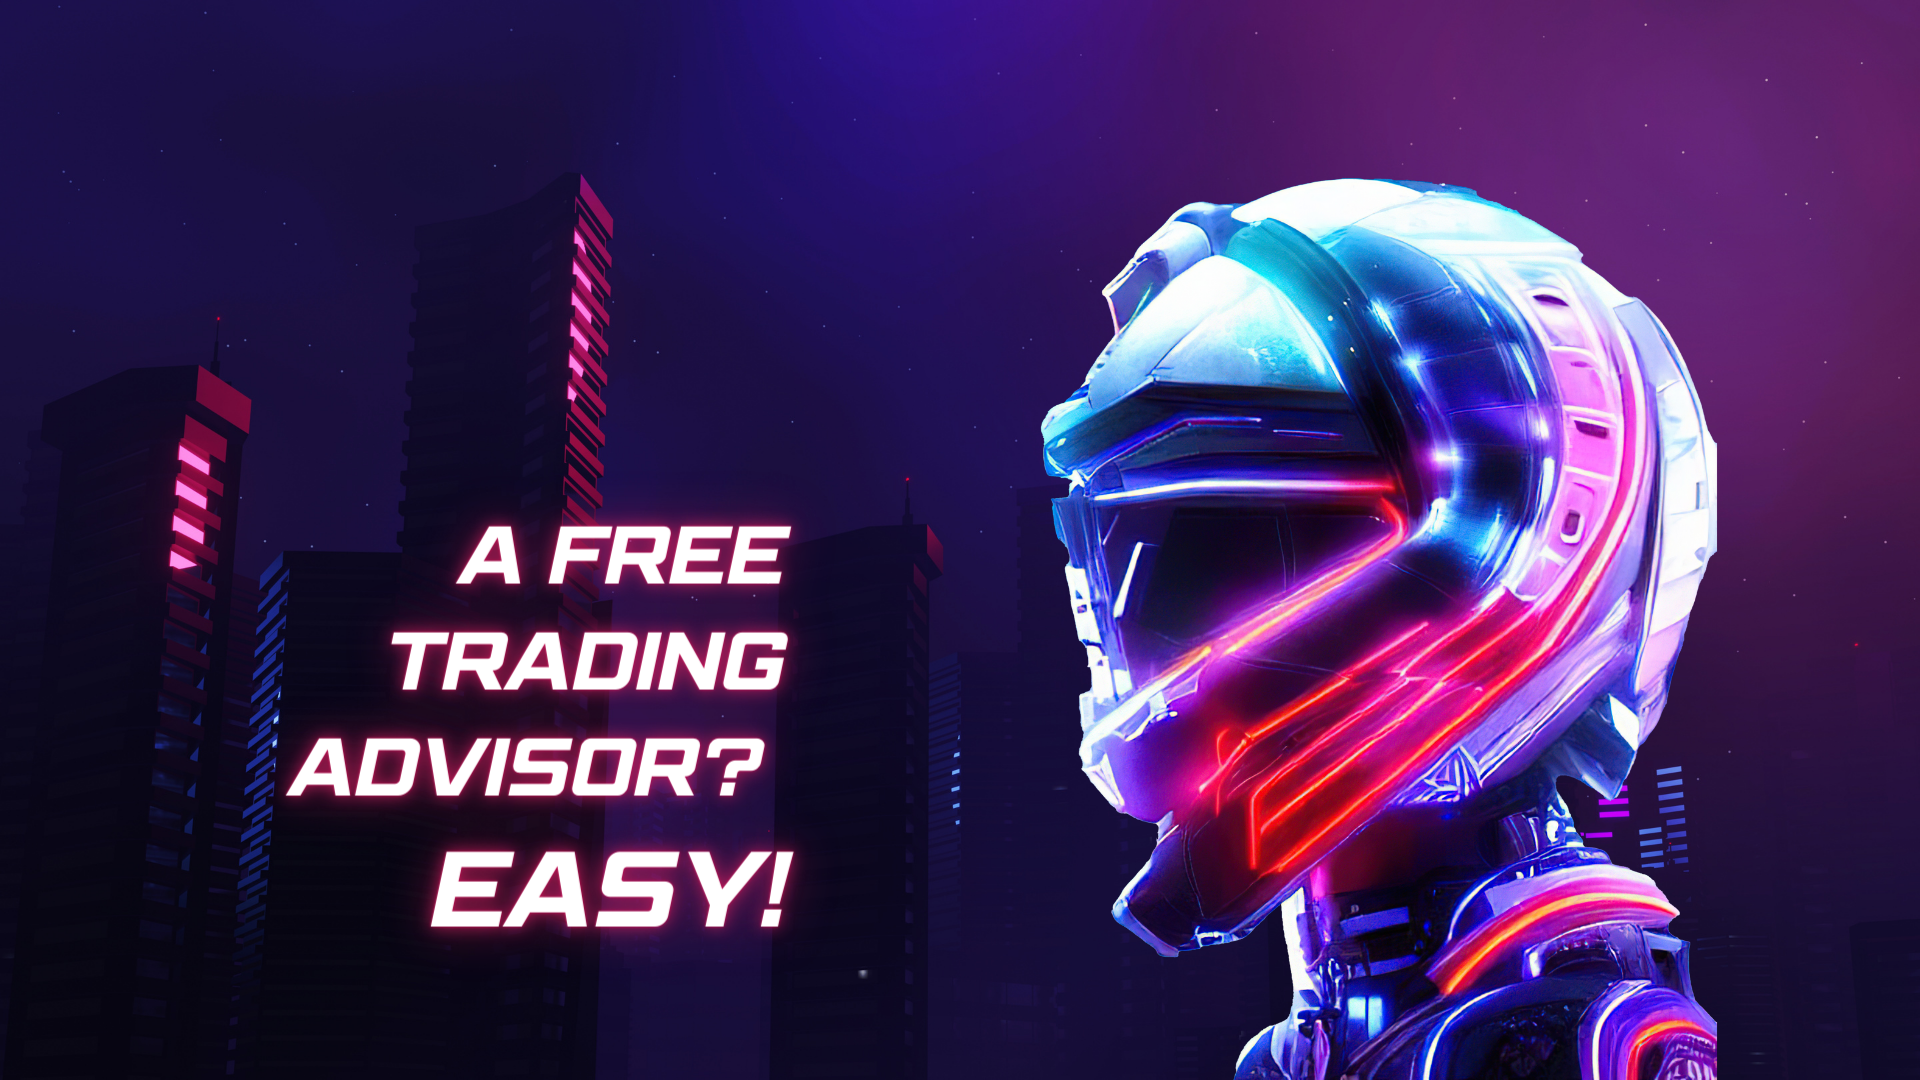 How to get a free trading advisor?